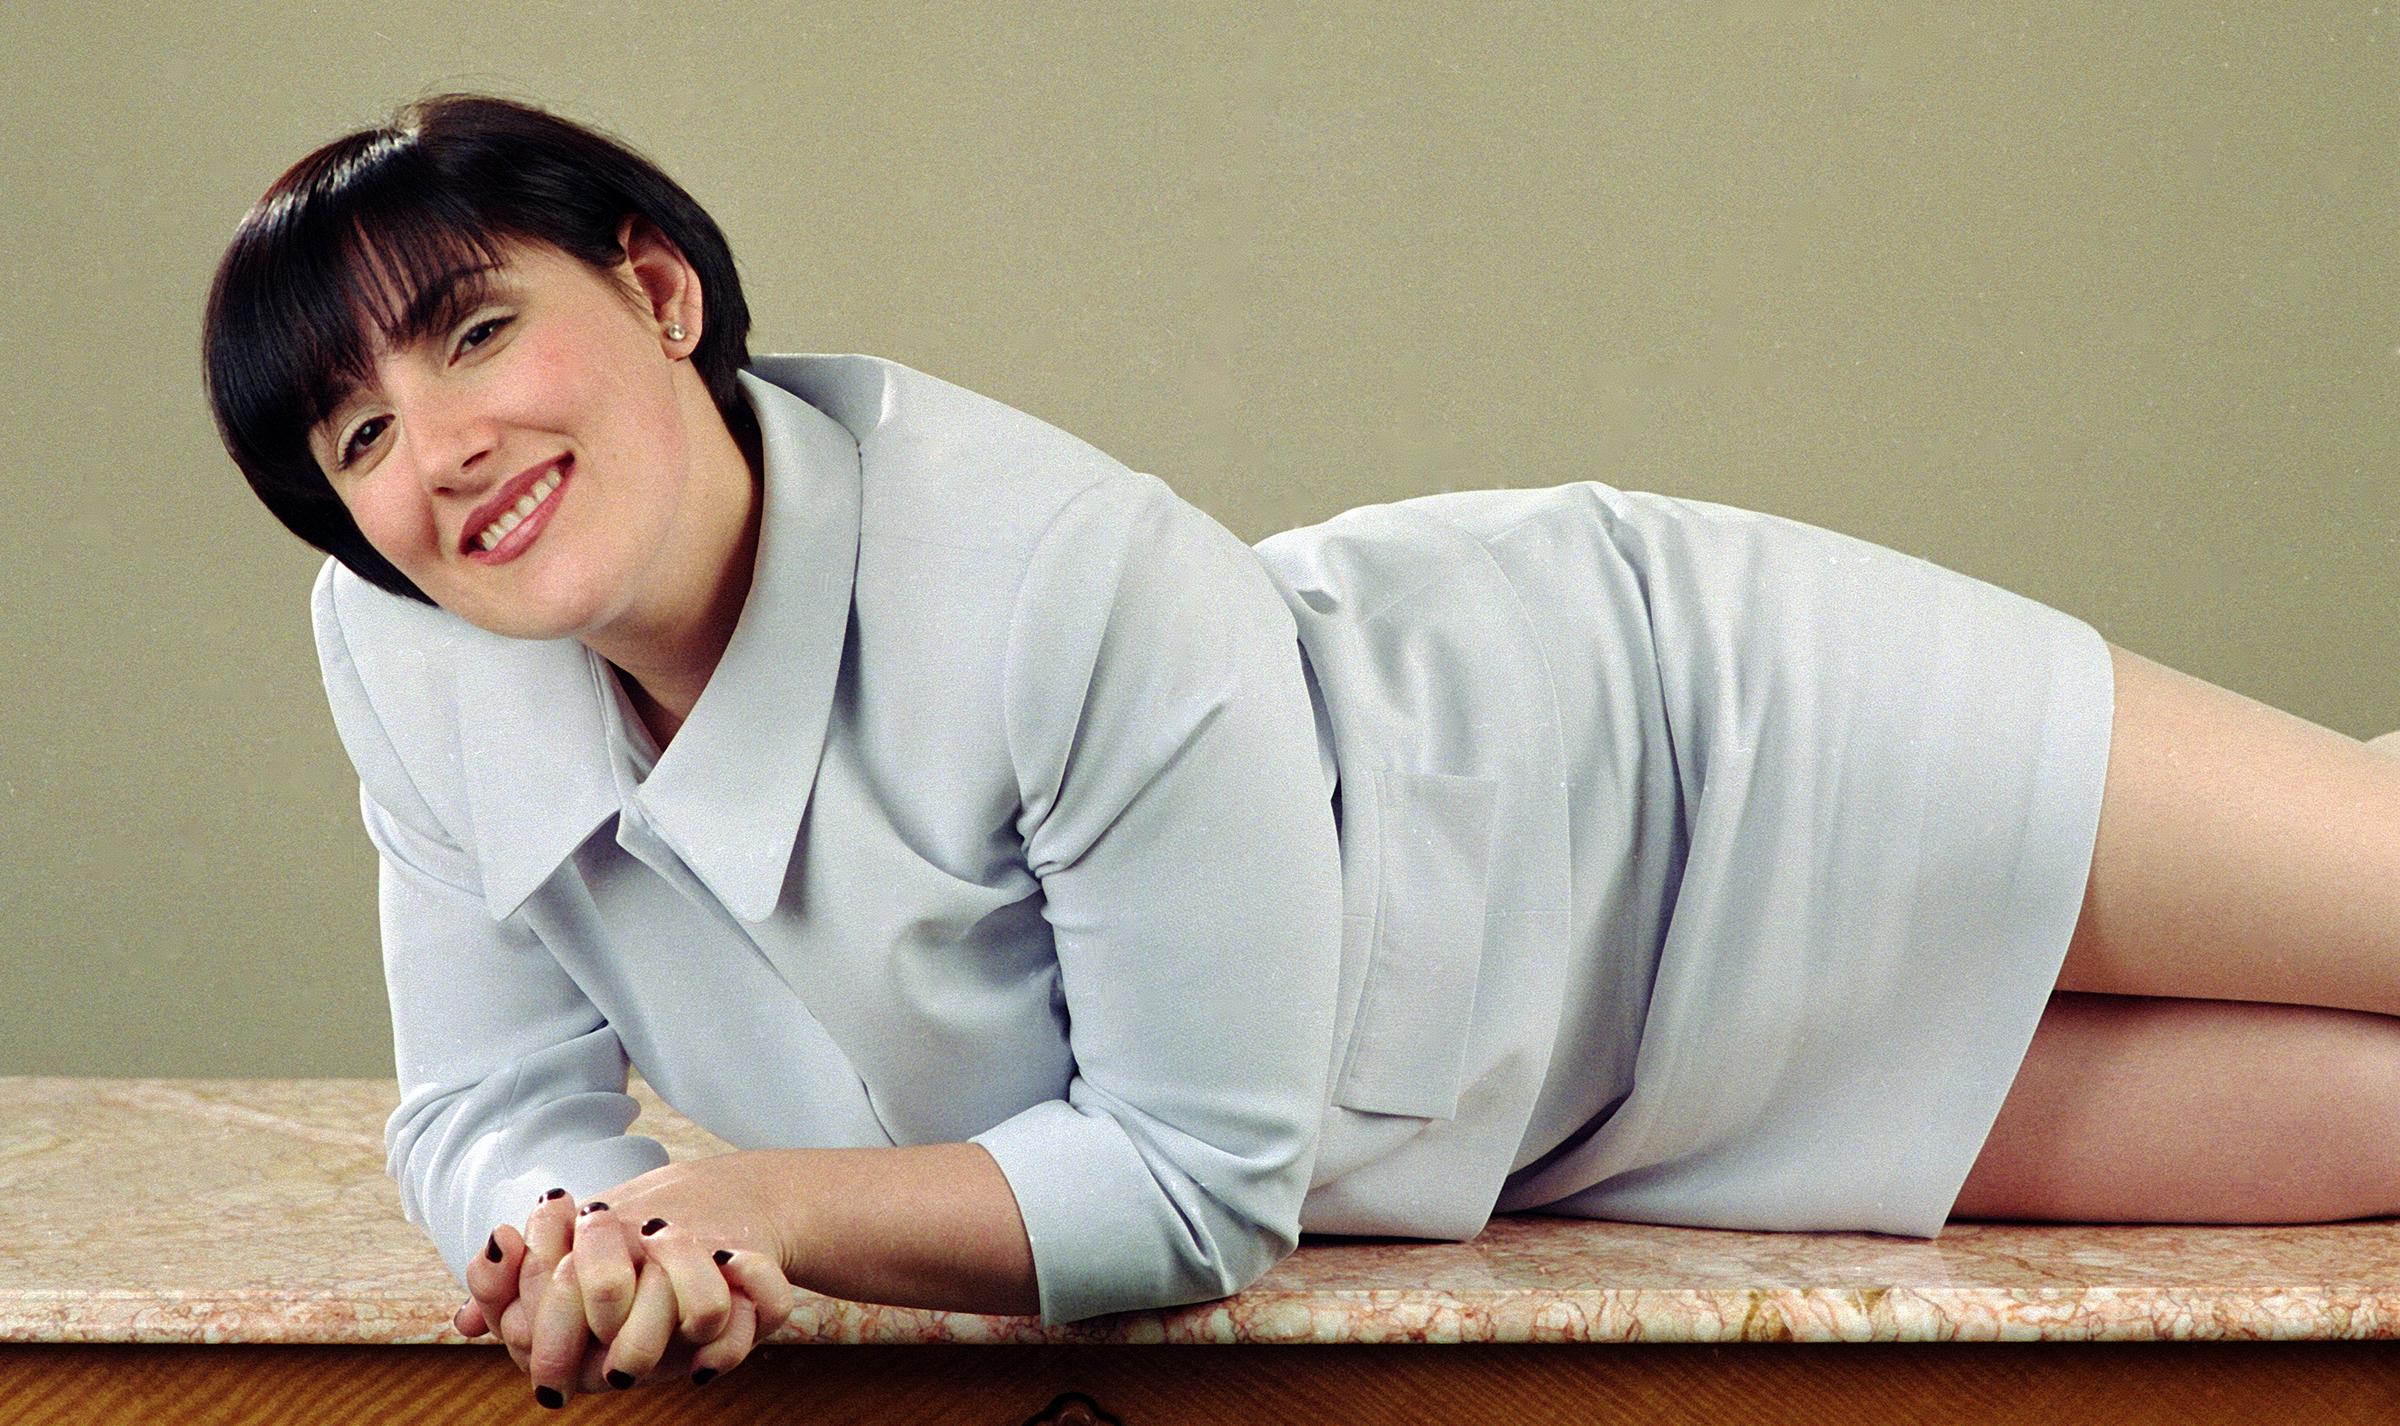 Ricki Lake portrait in Los Angeles, California, on March 31, 1996. | Source: Getty Images